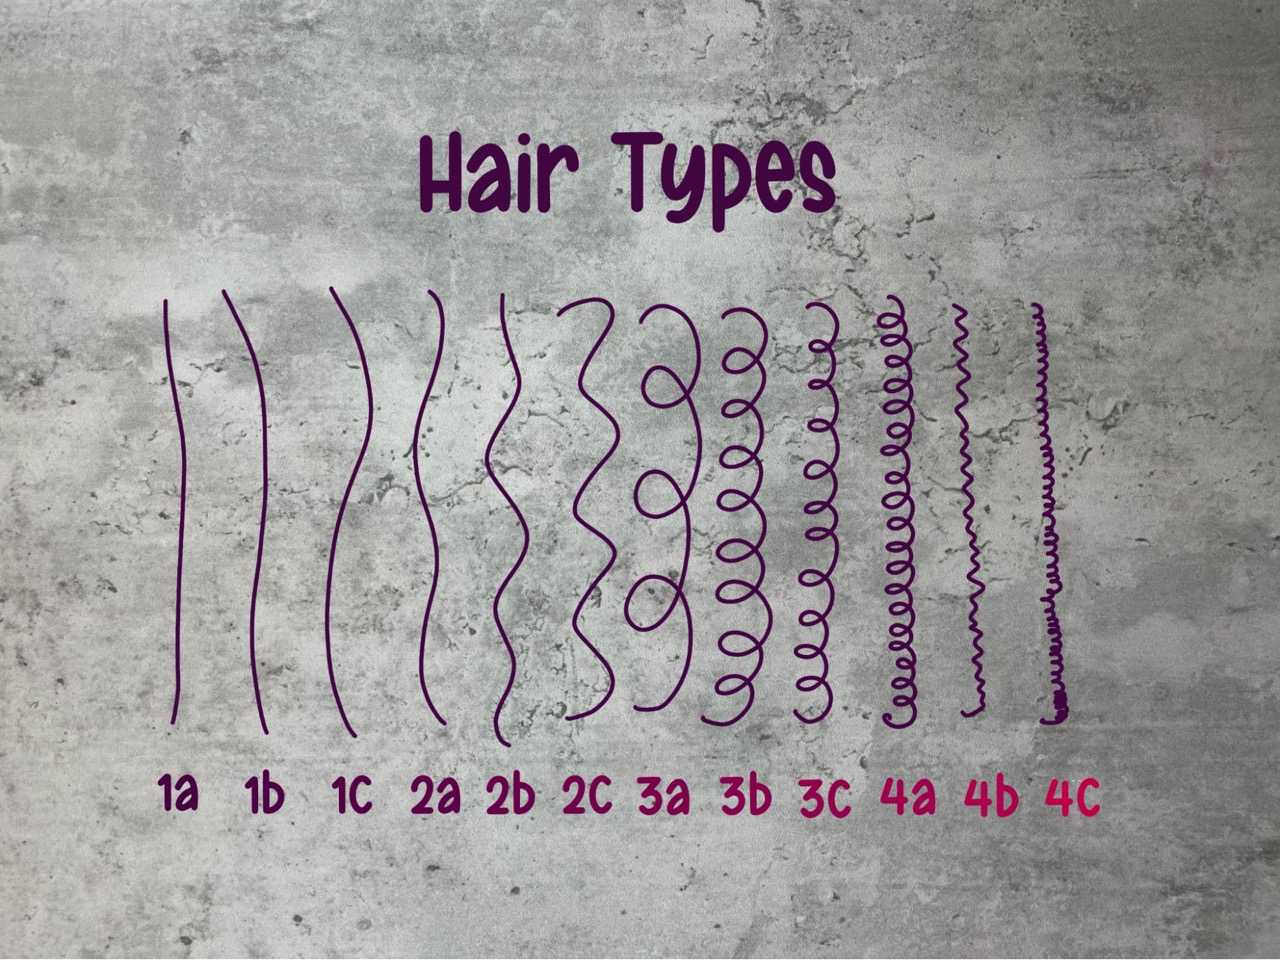 Hair Types and Needs | DIY Cosmetica